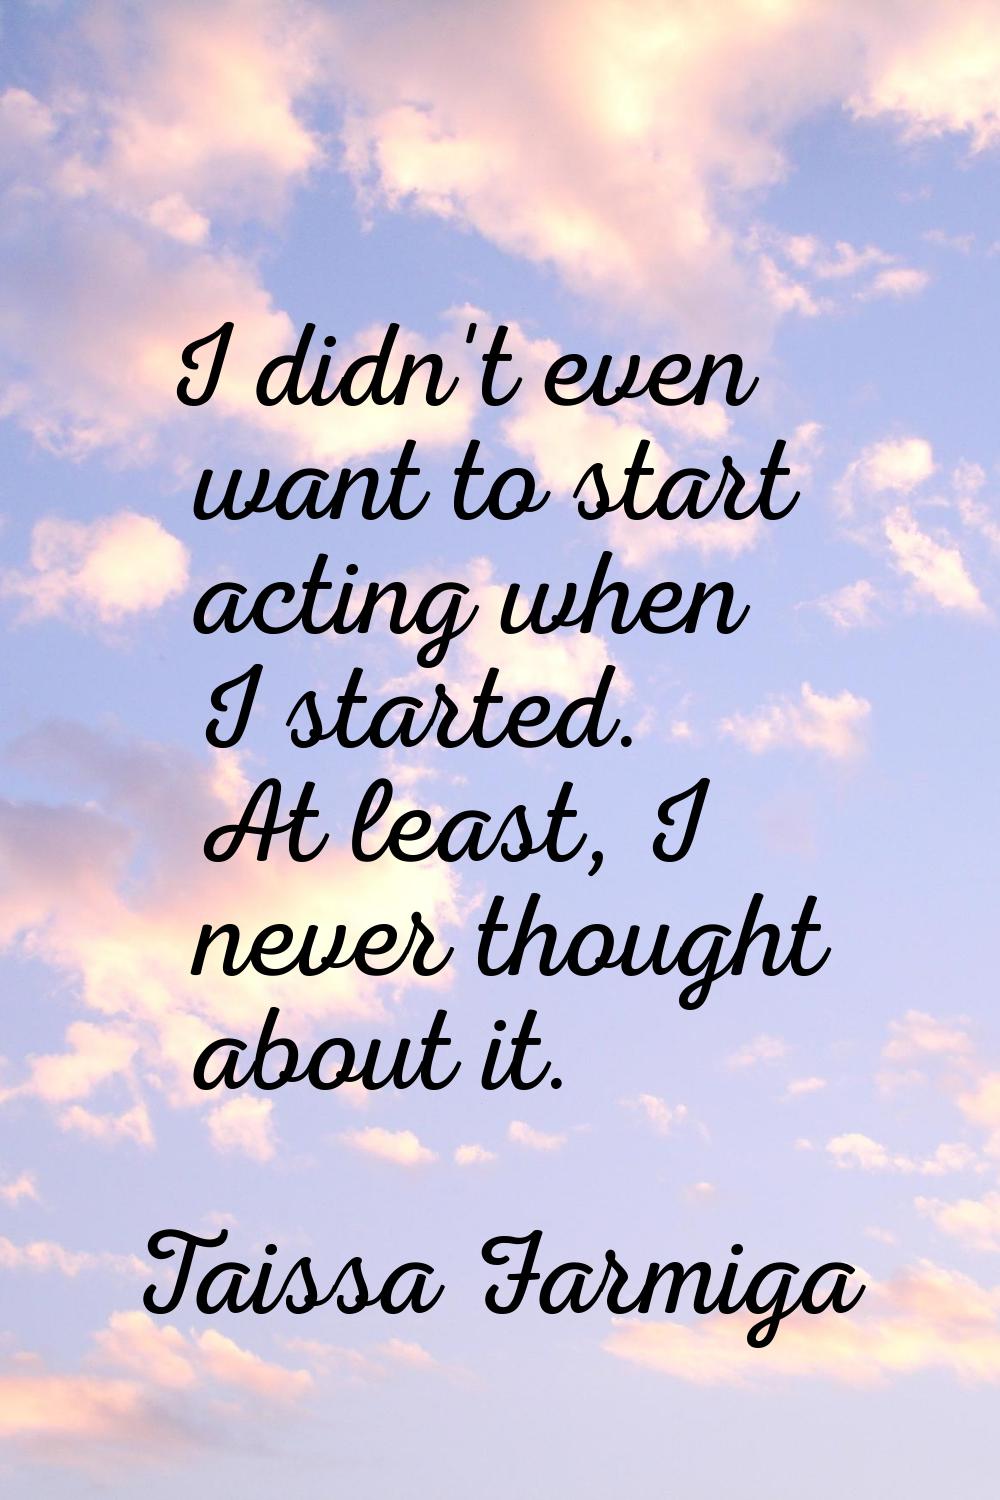 I didn't even want to start acting when I started. At least, I never thought about it.